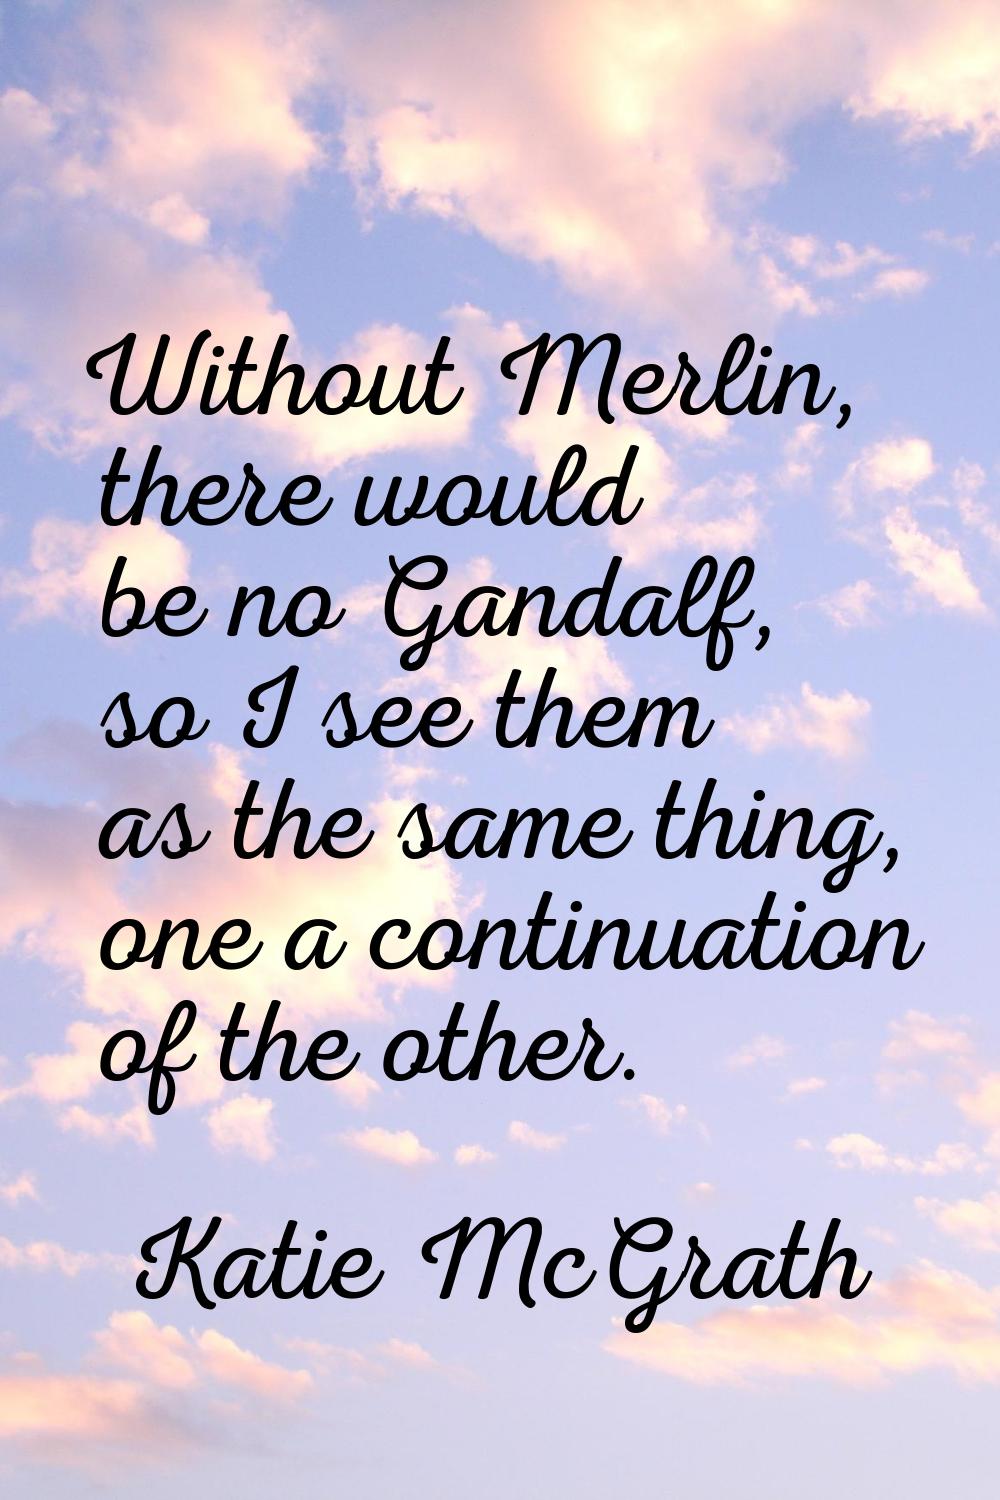 Without Merlin, there would be no Gandalf, so I see them as the same thing, one a continuation of t